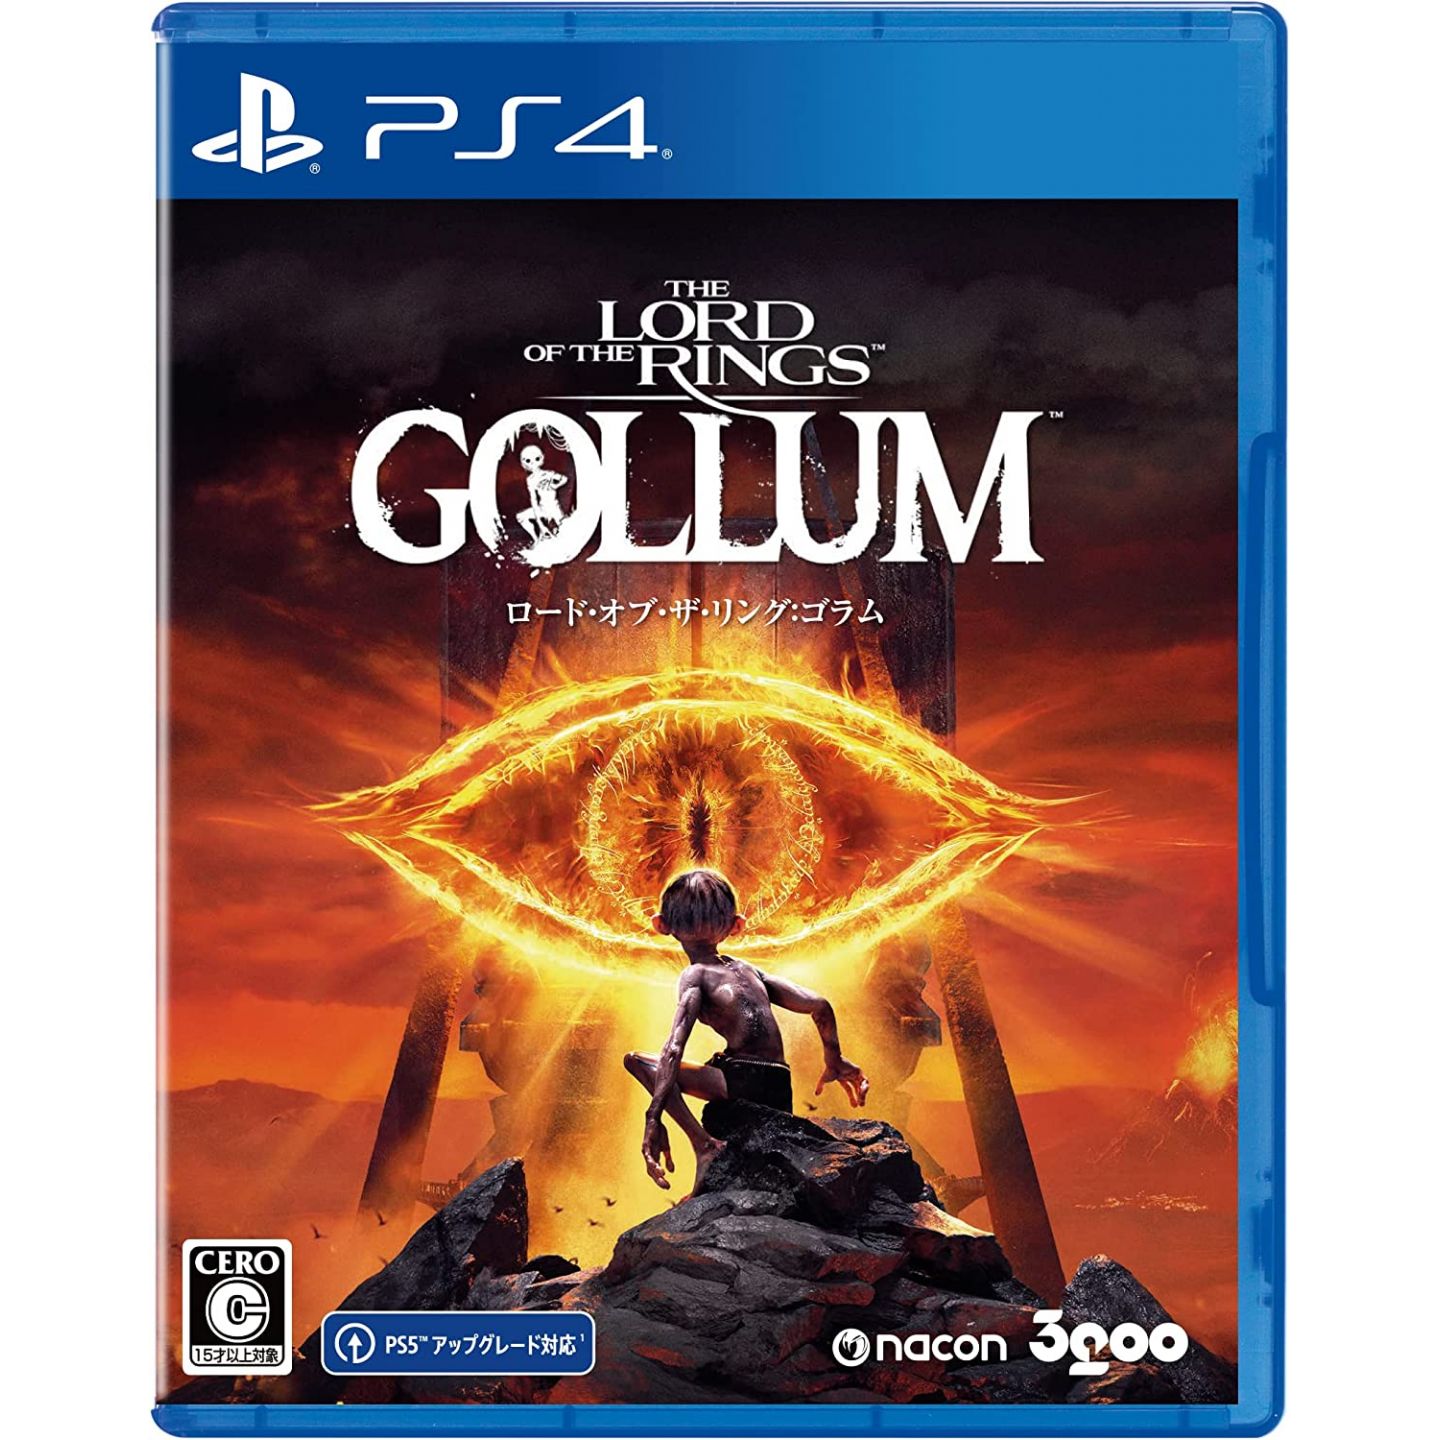 The Lord of the Rings - Gollum, Sony Playstation 4